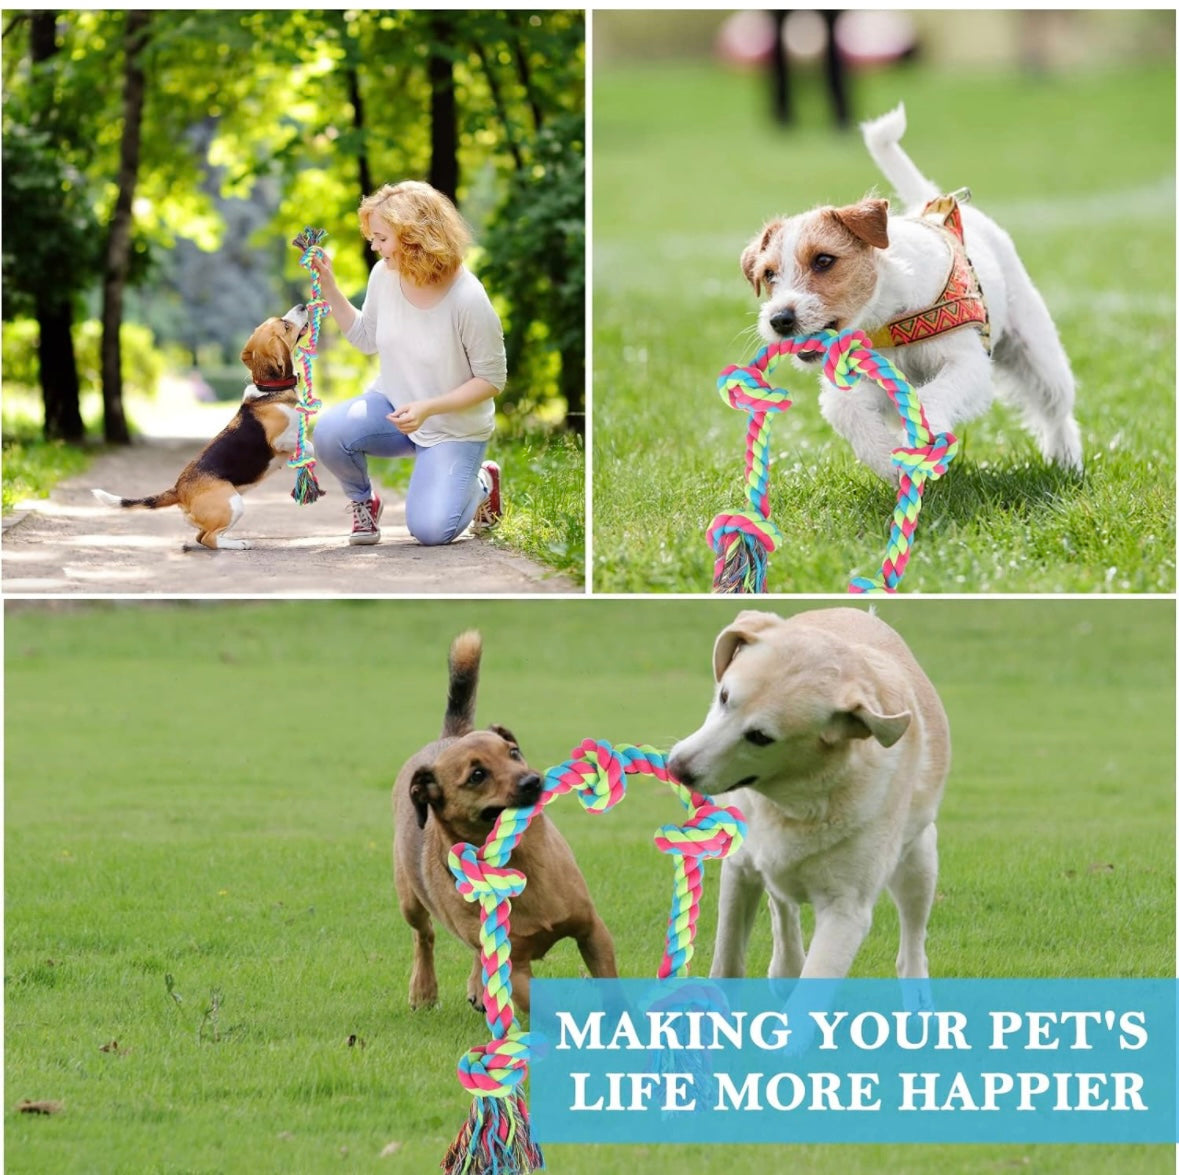 Large rope dog toy - create hours of tug of war fun with your dog